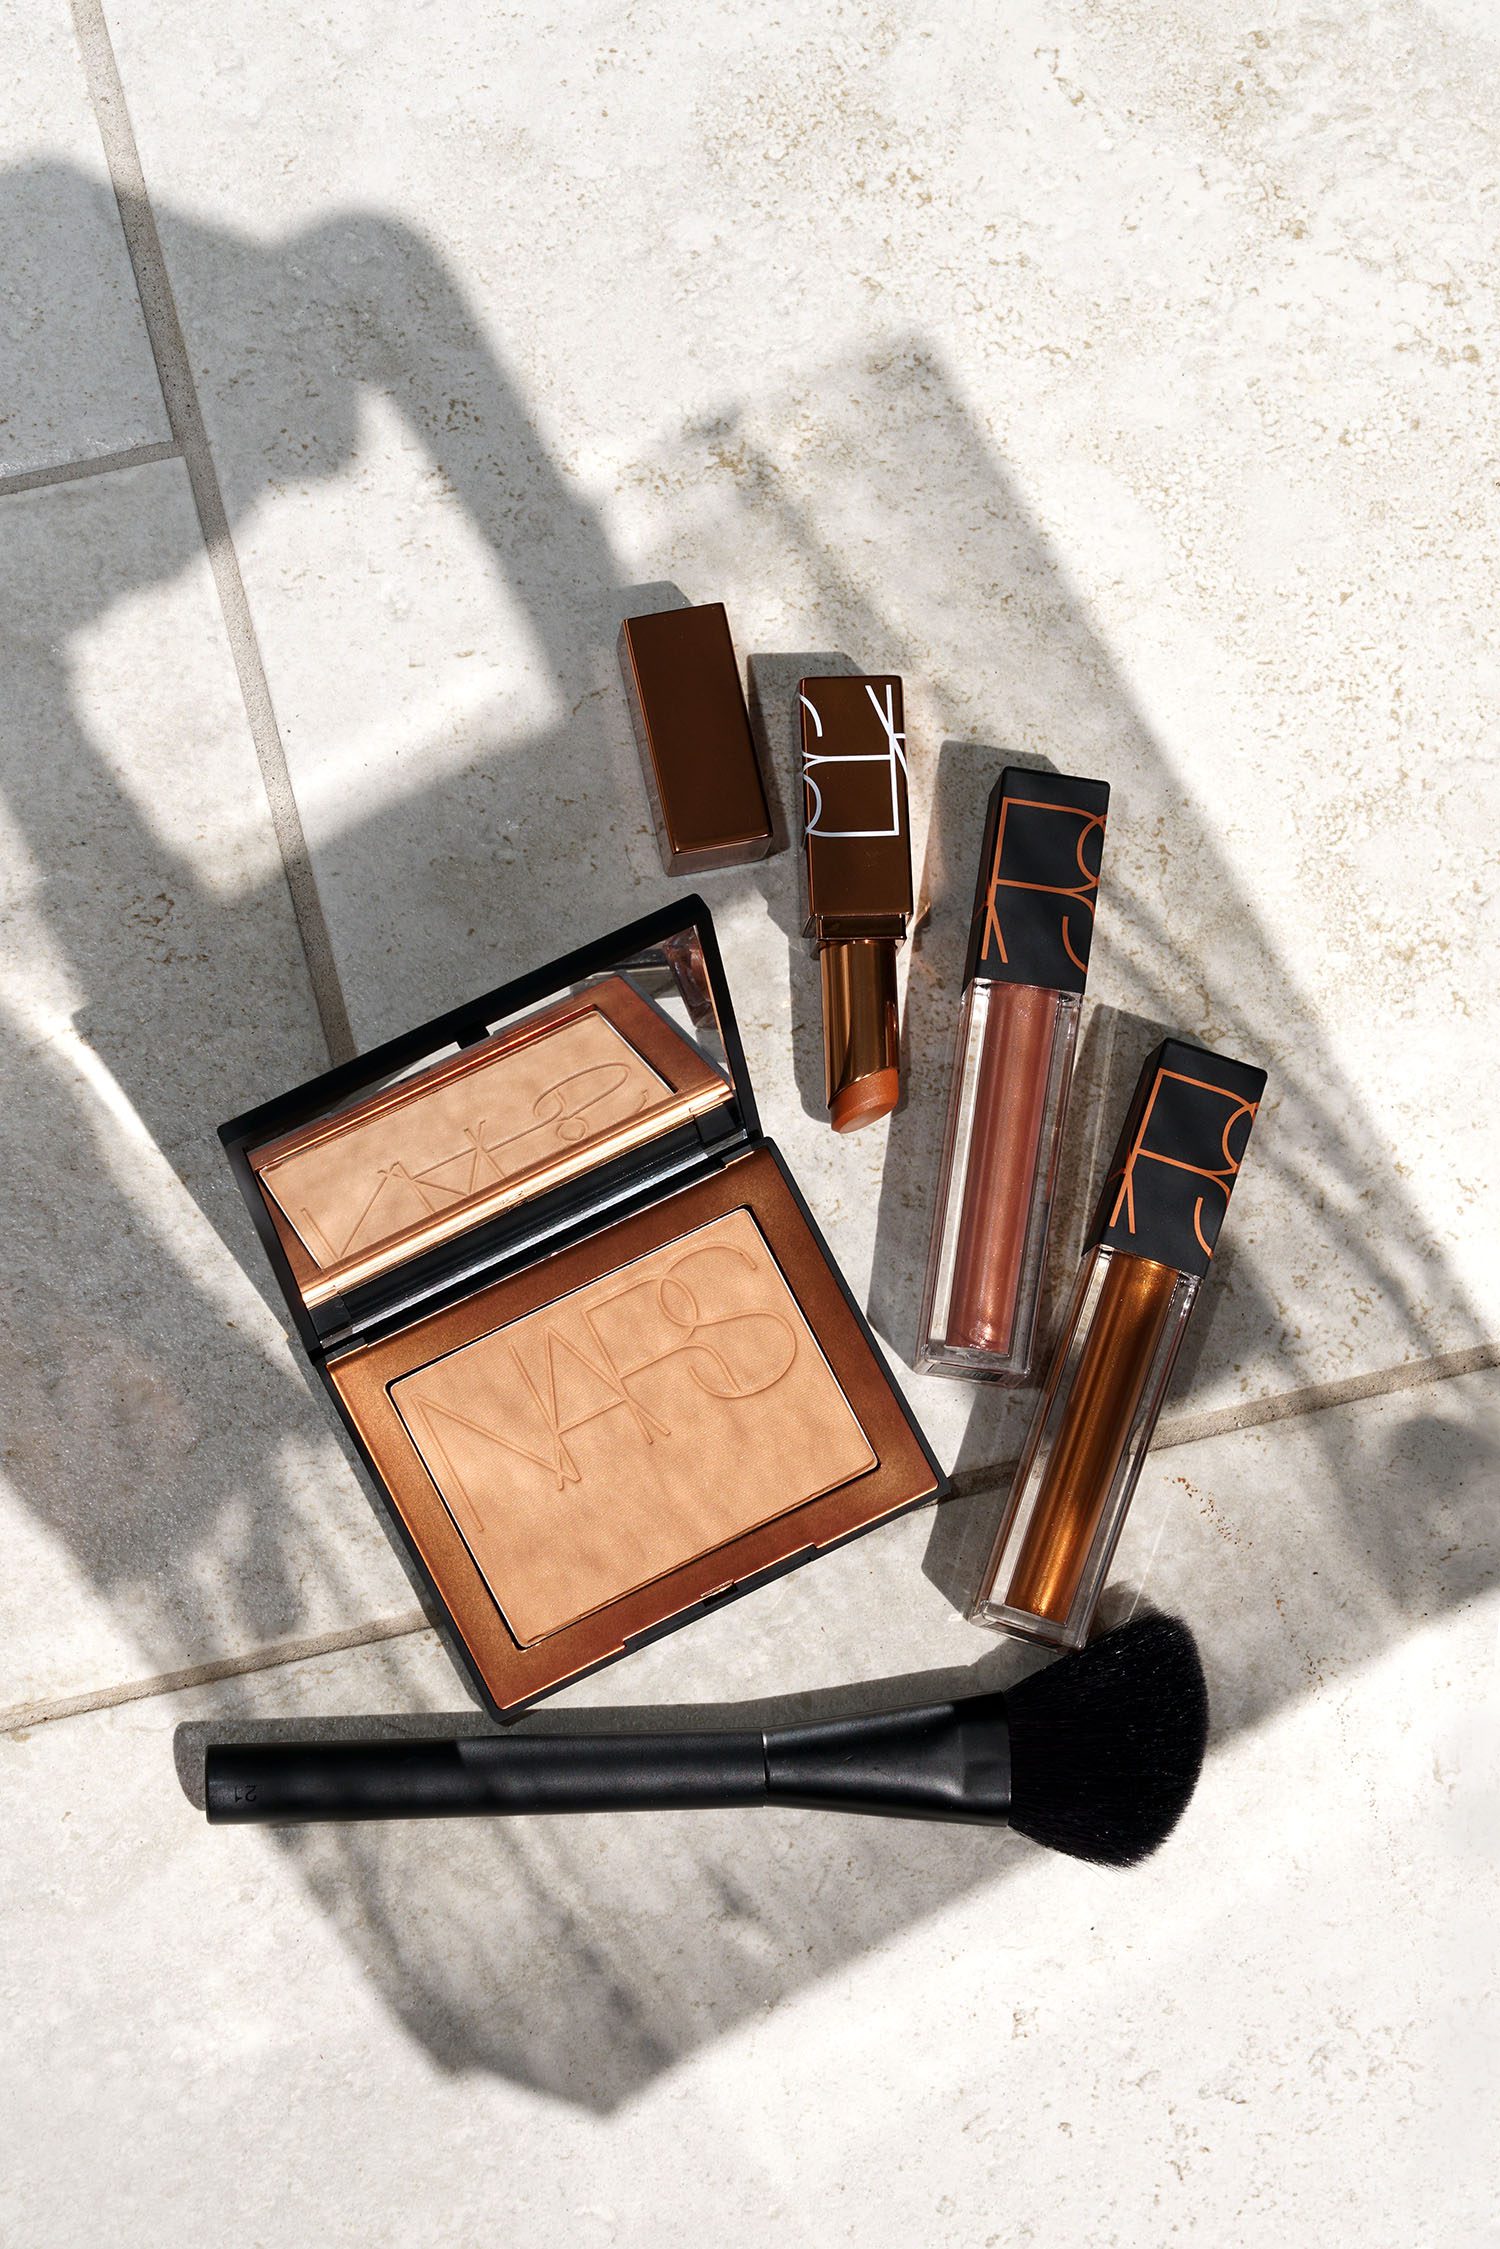 NARS Summer 2020 Collection Haul Picks - The Beauty Look Book